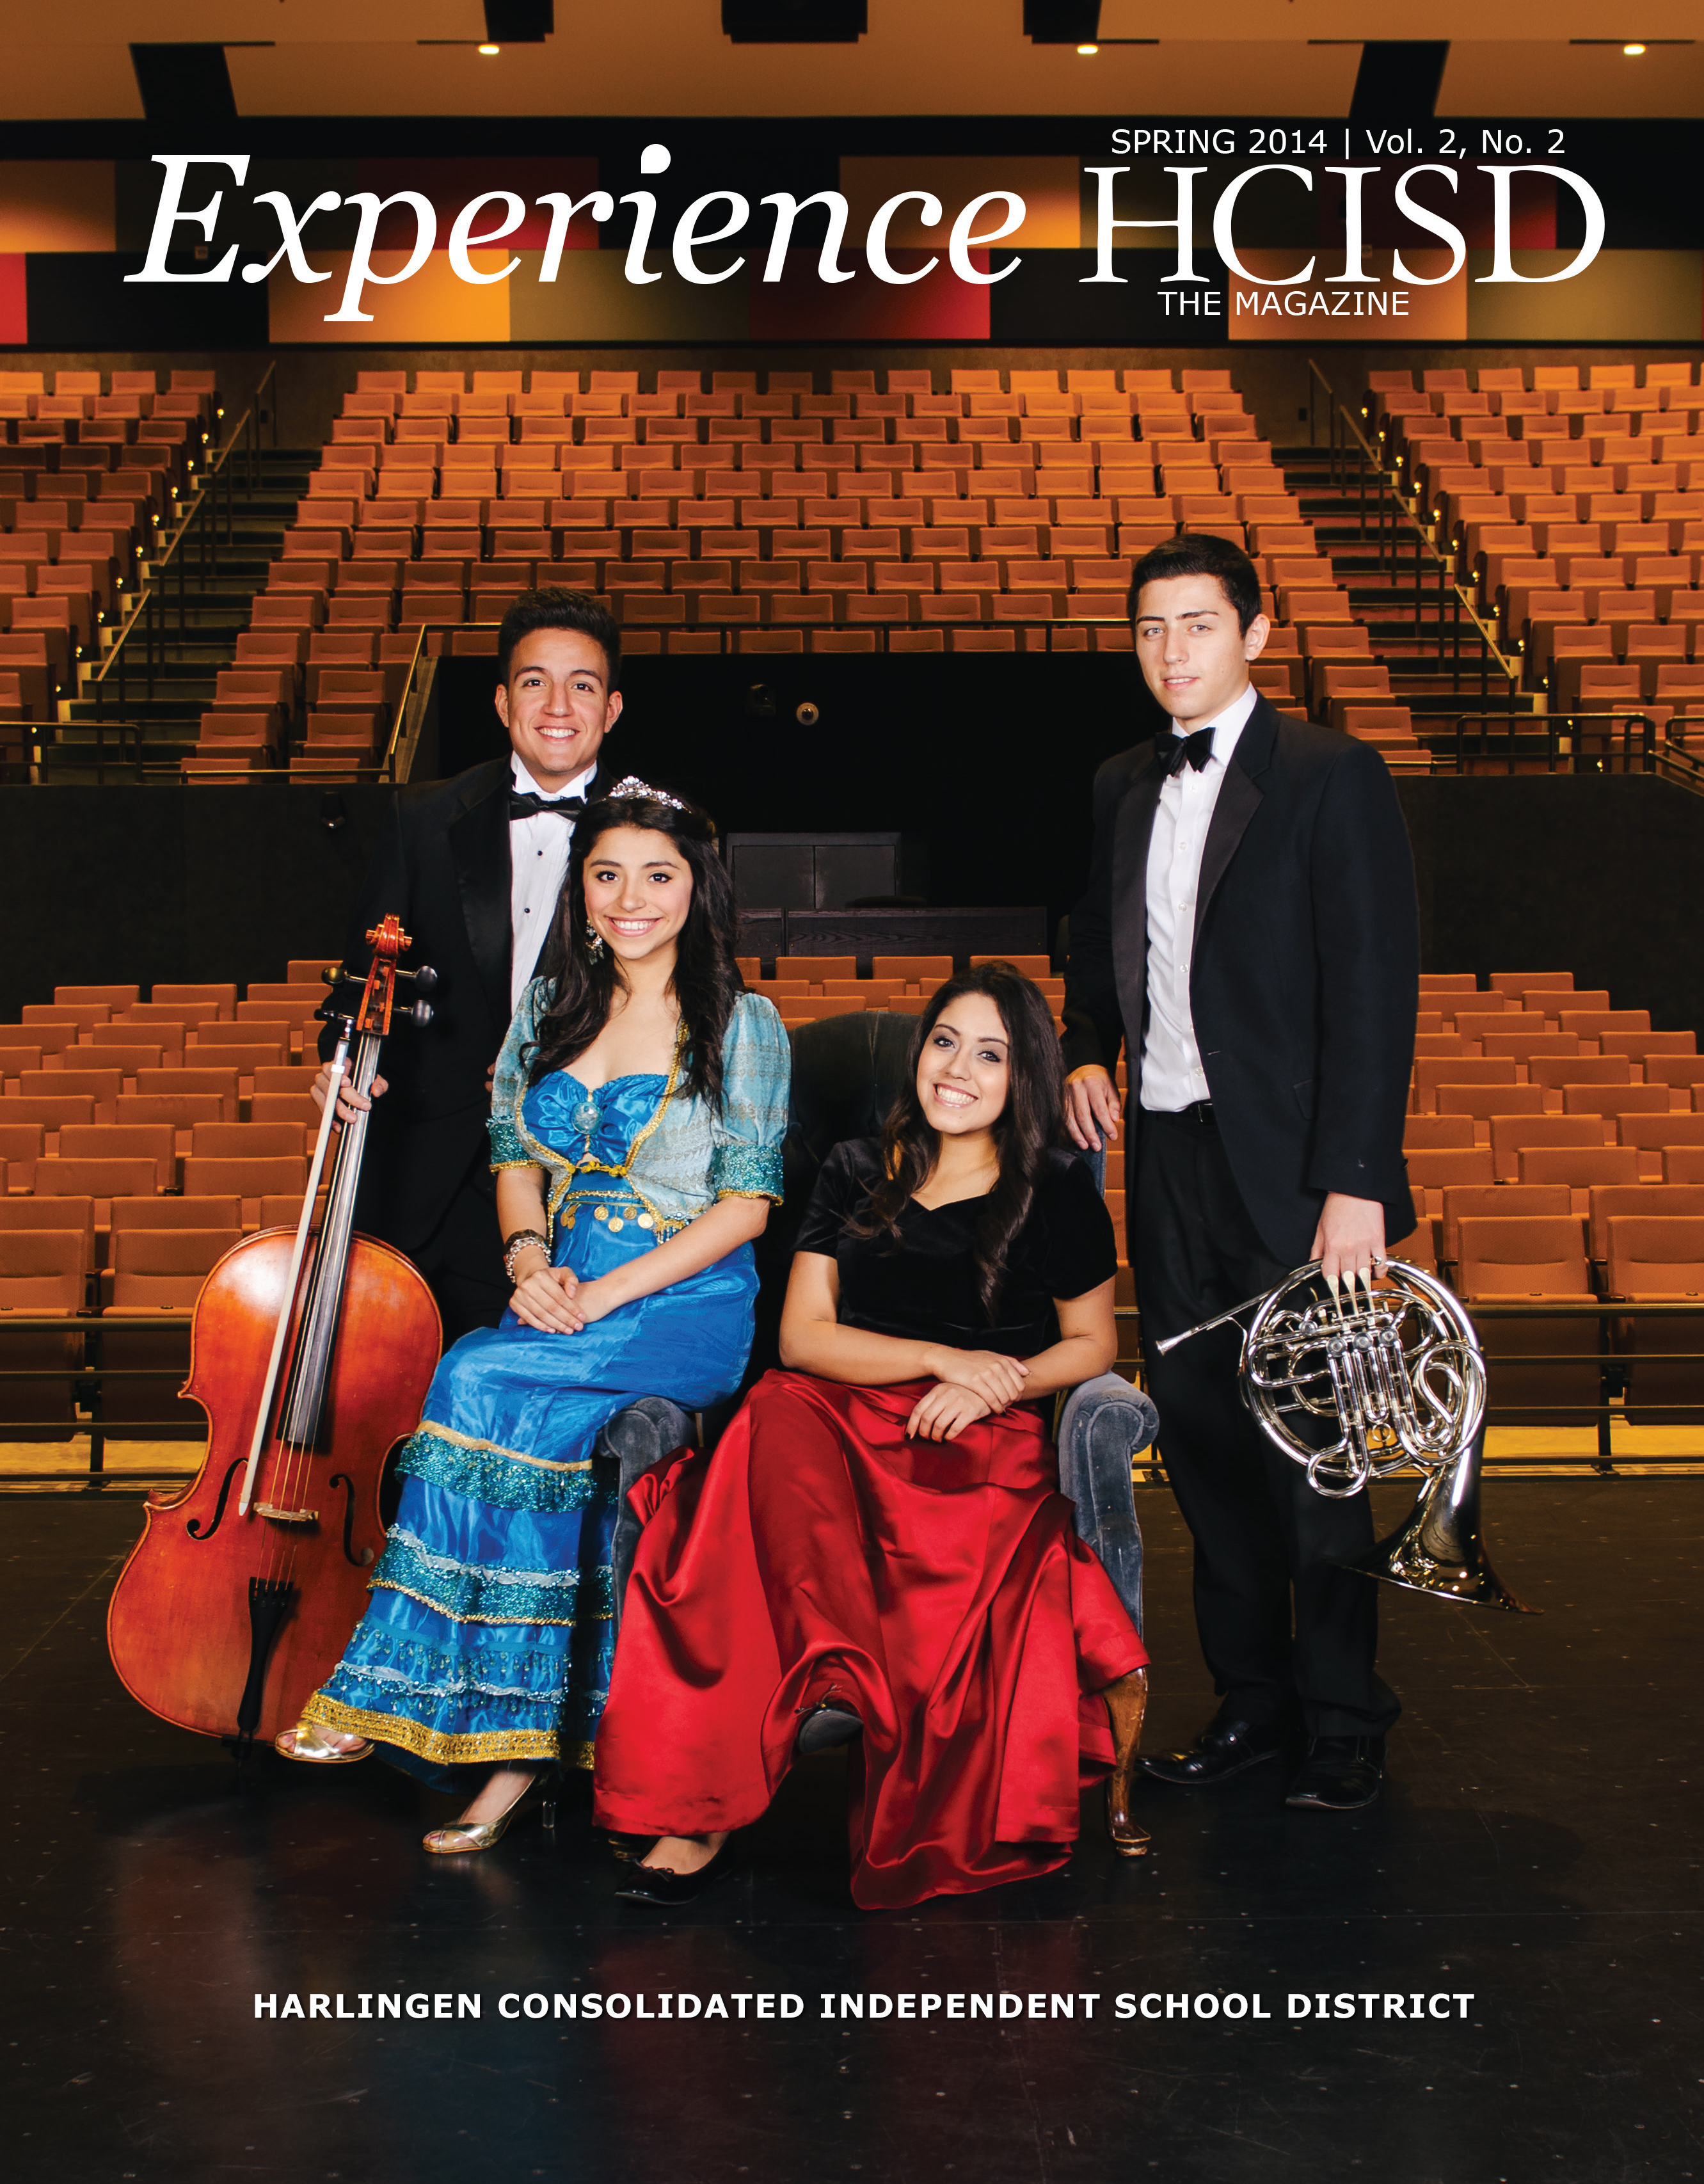 HCISD releases issue 4 of Experience HCISD The Magazine